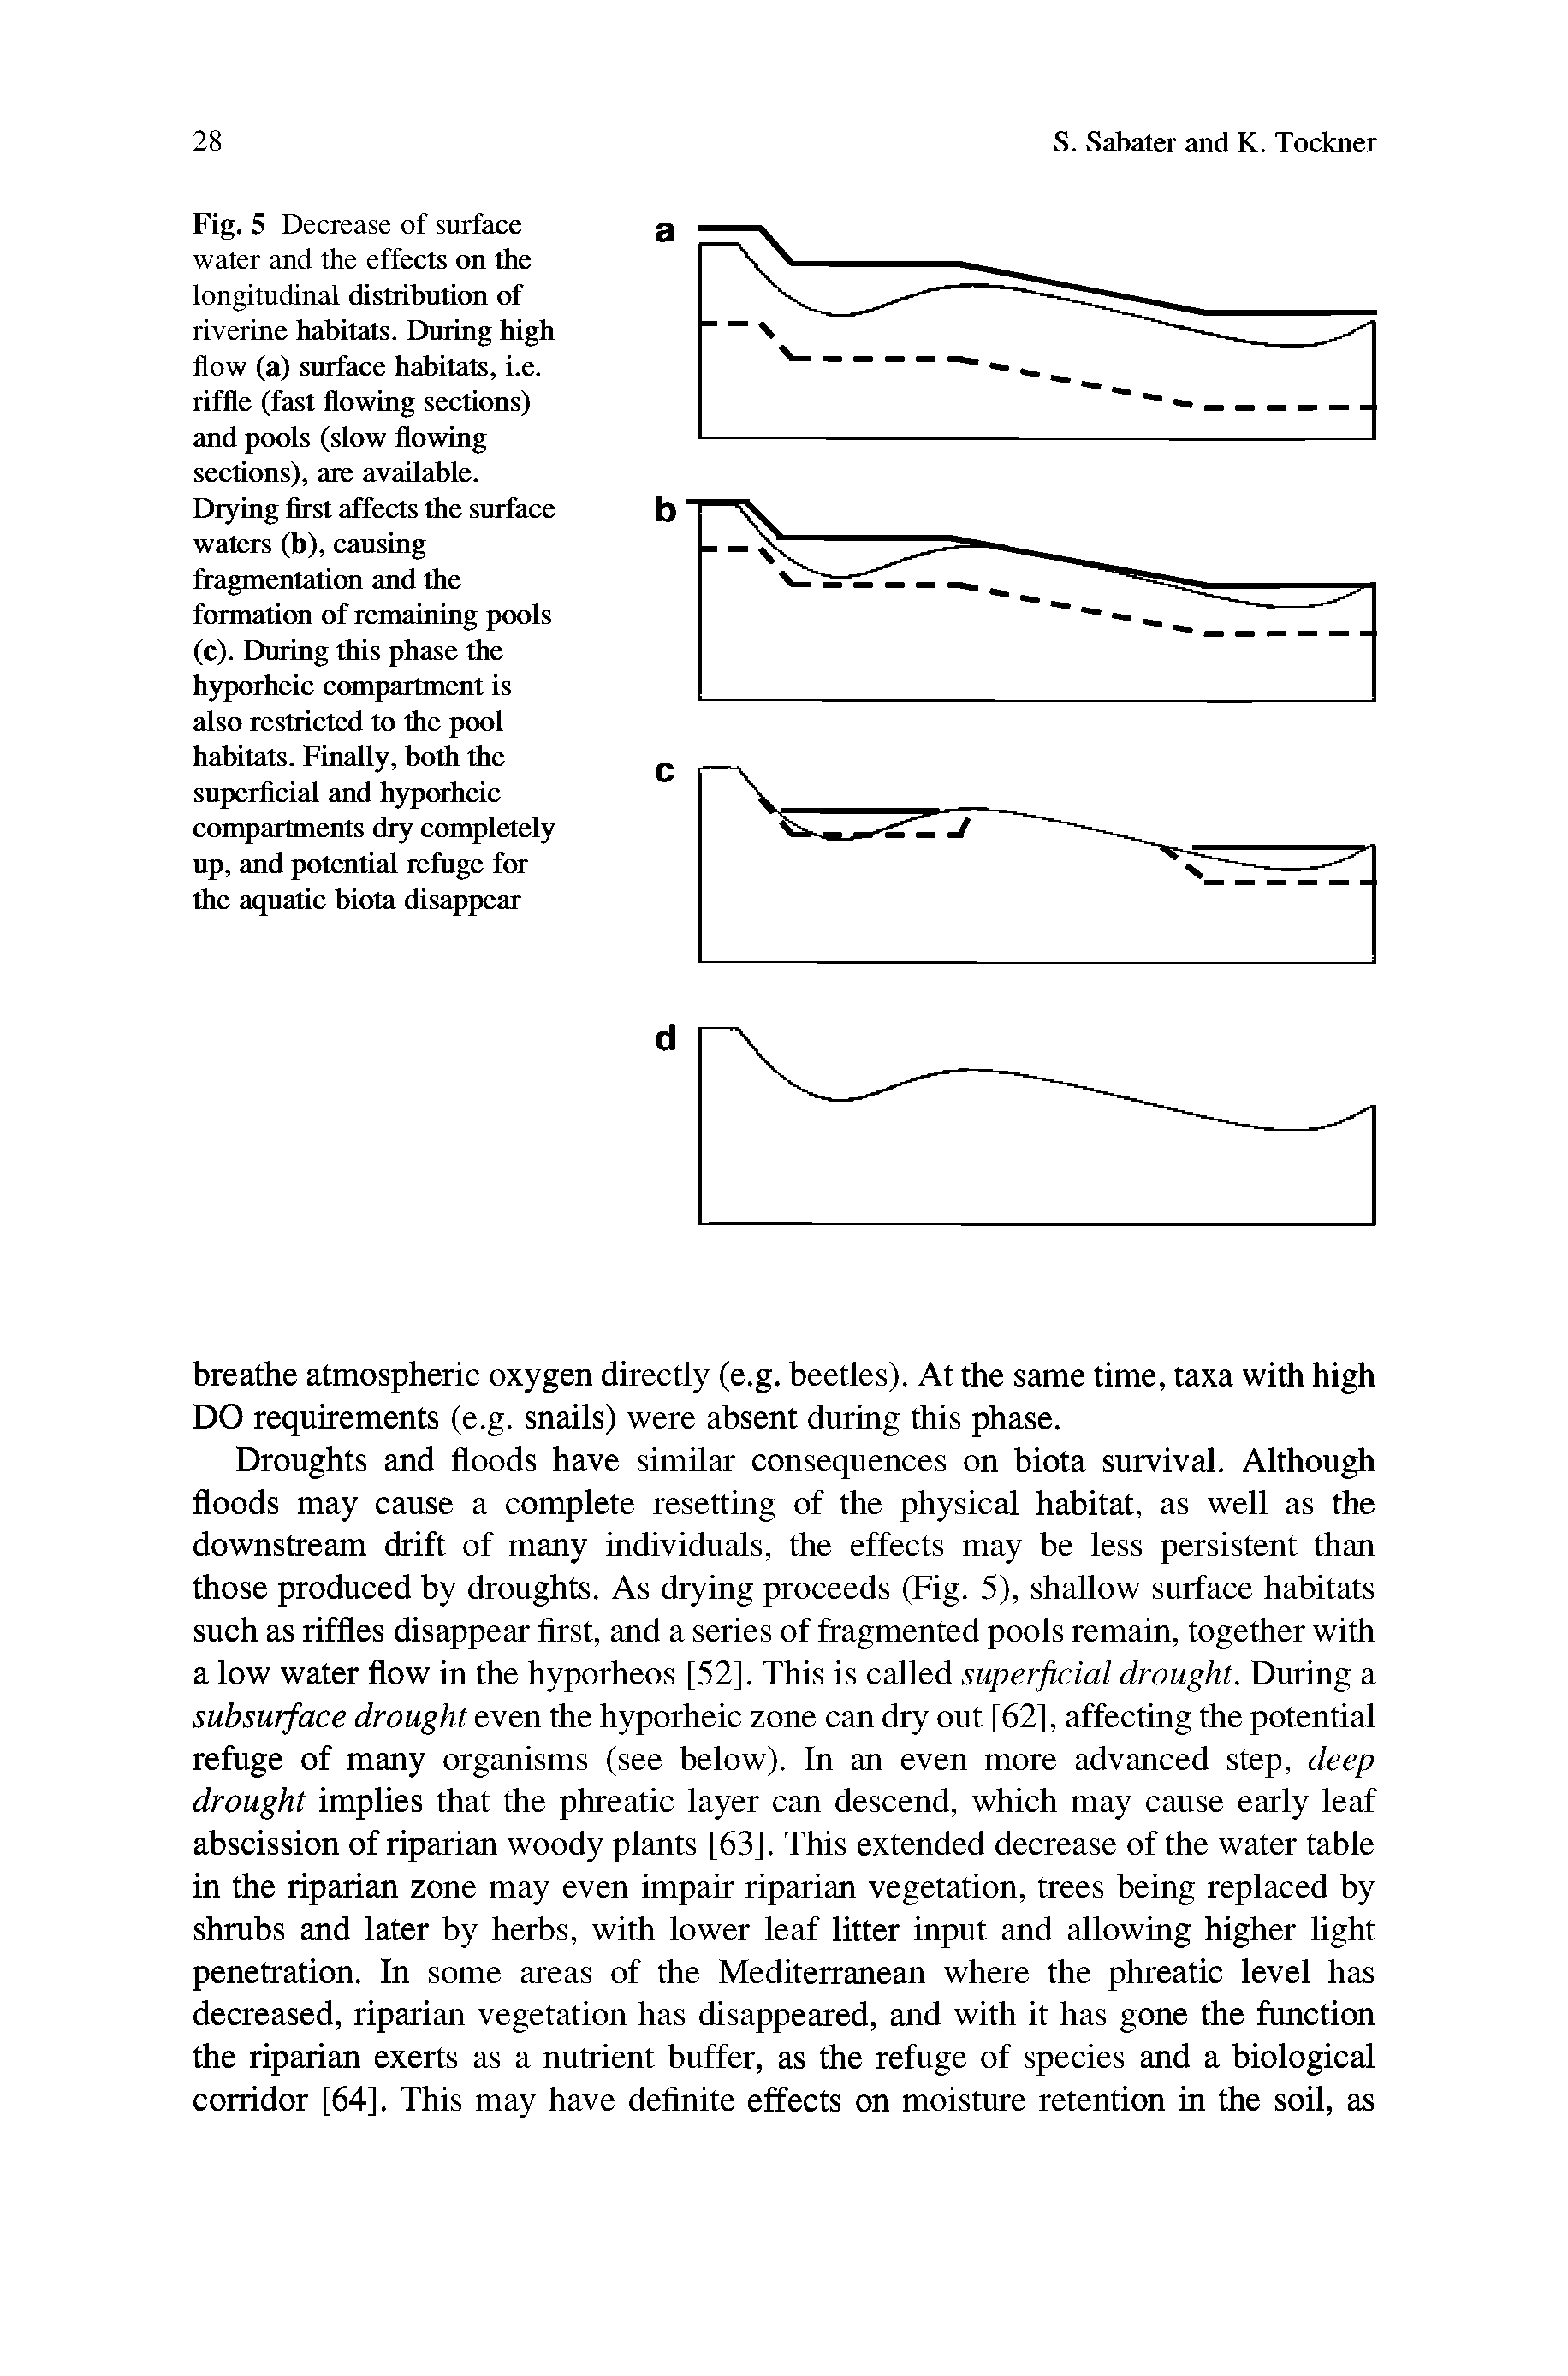 Fig. 5 Decrease of surface water and the effects on the longitudinal distribution of riverine habitats. During high flow (a) surface habitats, i.e. riffle (fast flowing sections) and pools (slow flowing sections), are available. Drying first affects the surface waters (b), causing fragmentation and the formation of remaining pools (c). During this phase the hyporheic compartment is also restricted to the pool habitats. Finally, both the superficial and hyporheic compartments dry completely up, and potential refuge for the aquatic biota disappear...